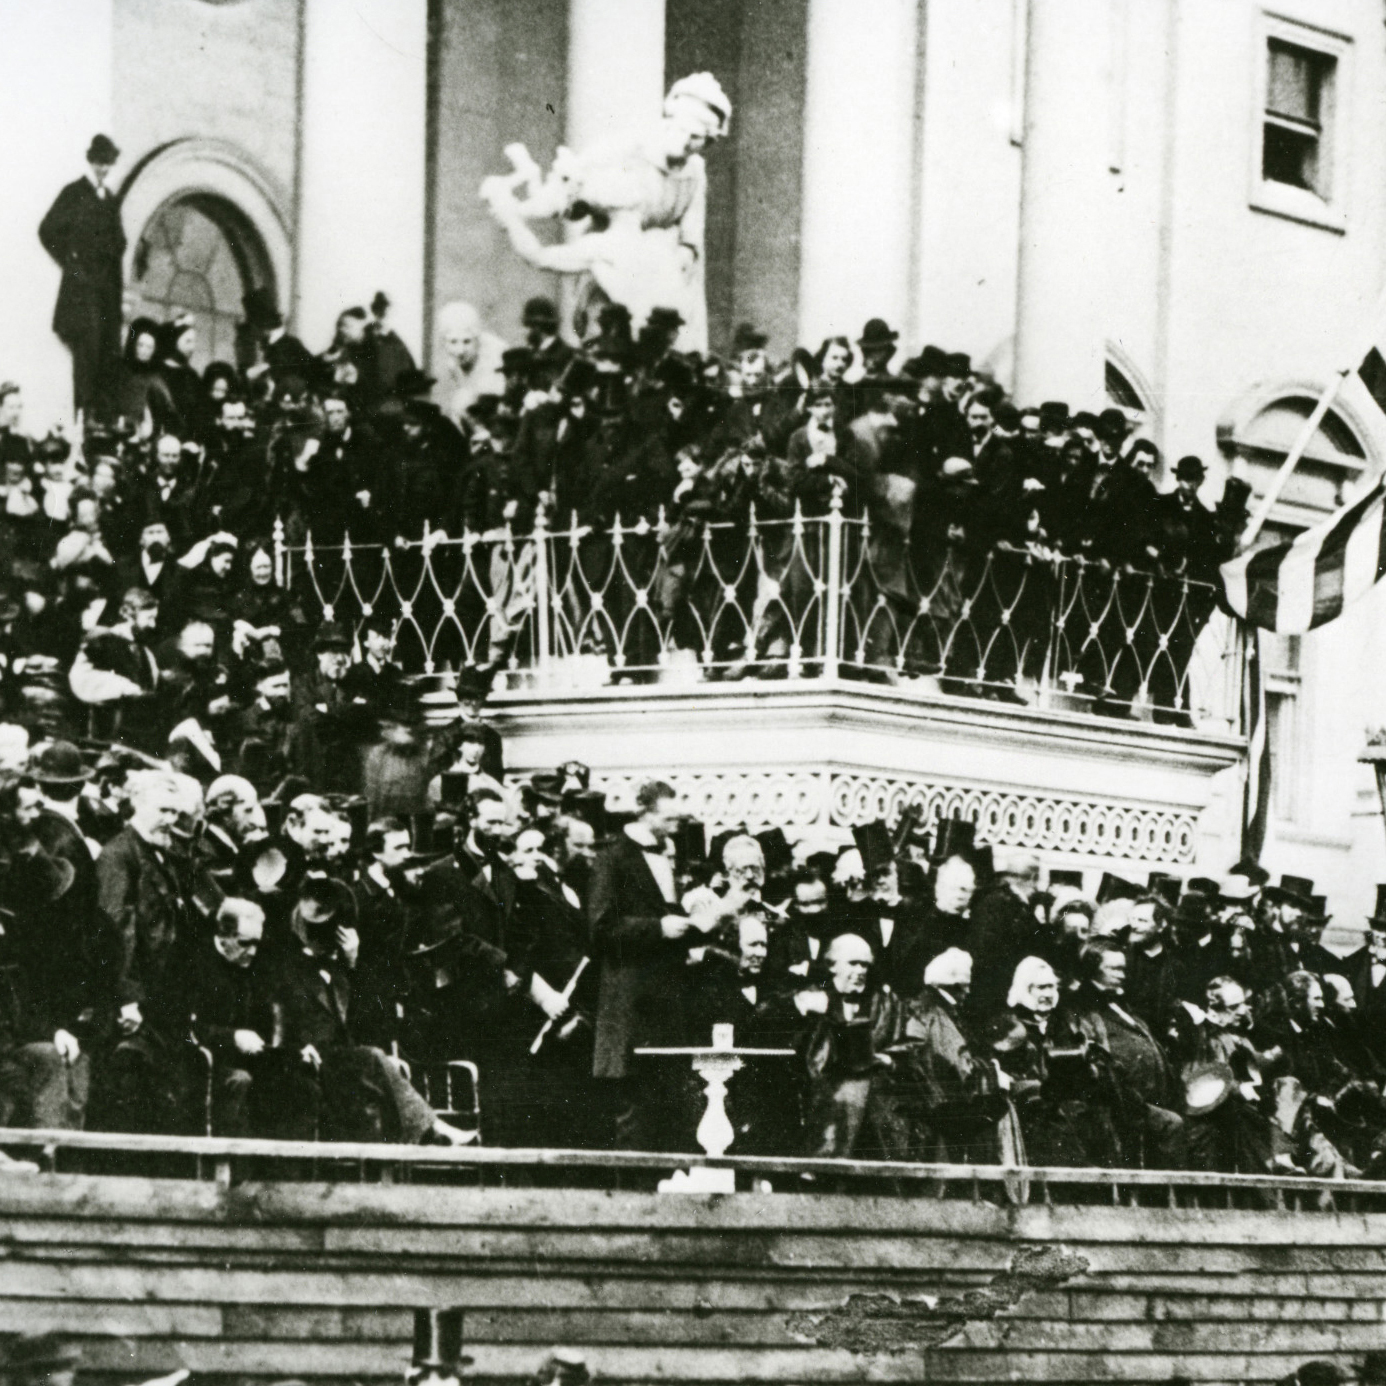 Abraham Lincoln's second inaugural address. Lincoln stands in front of crowd on steps of capitol